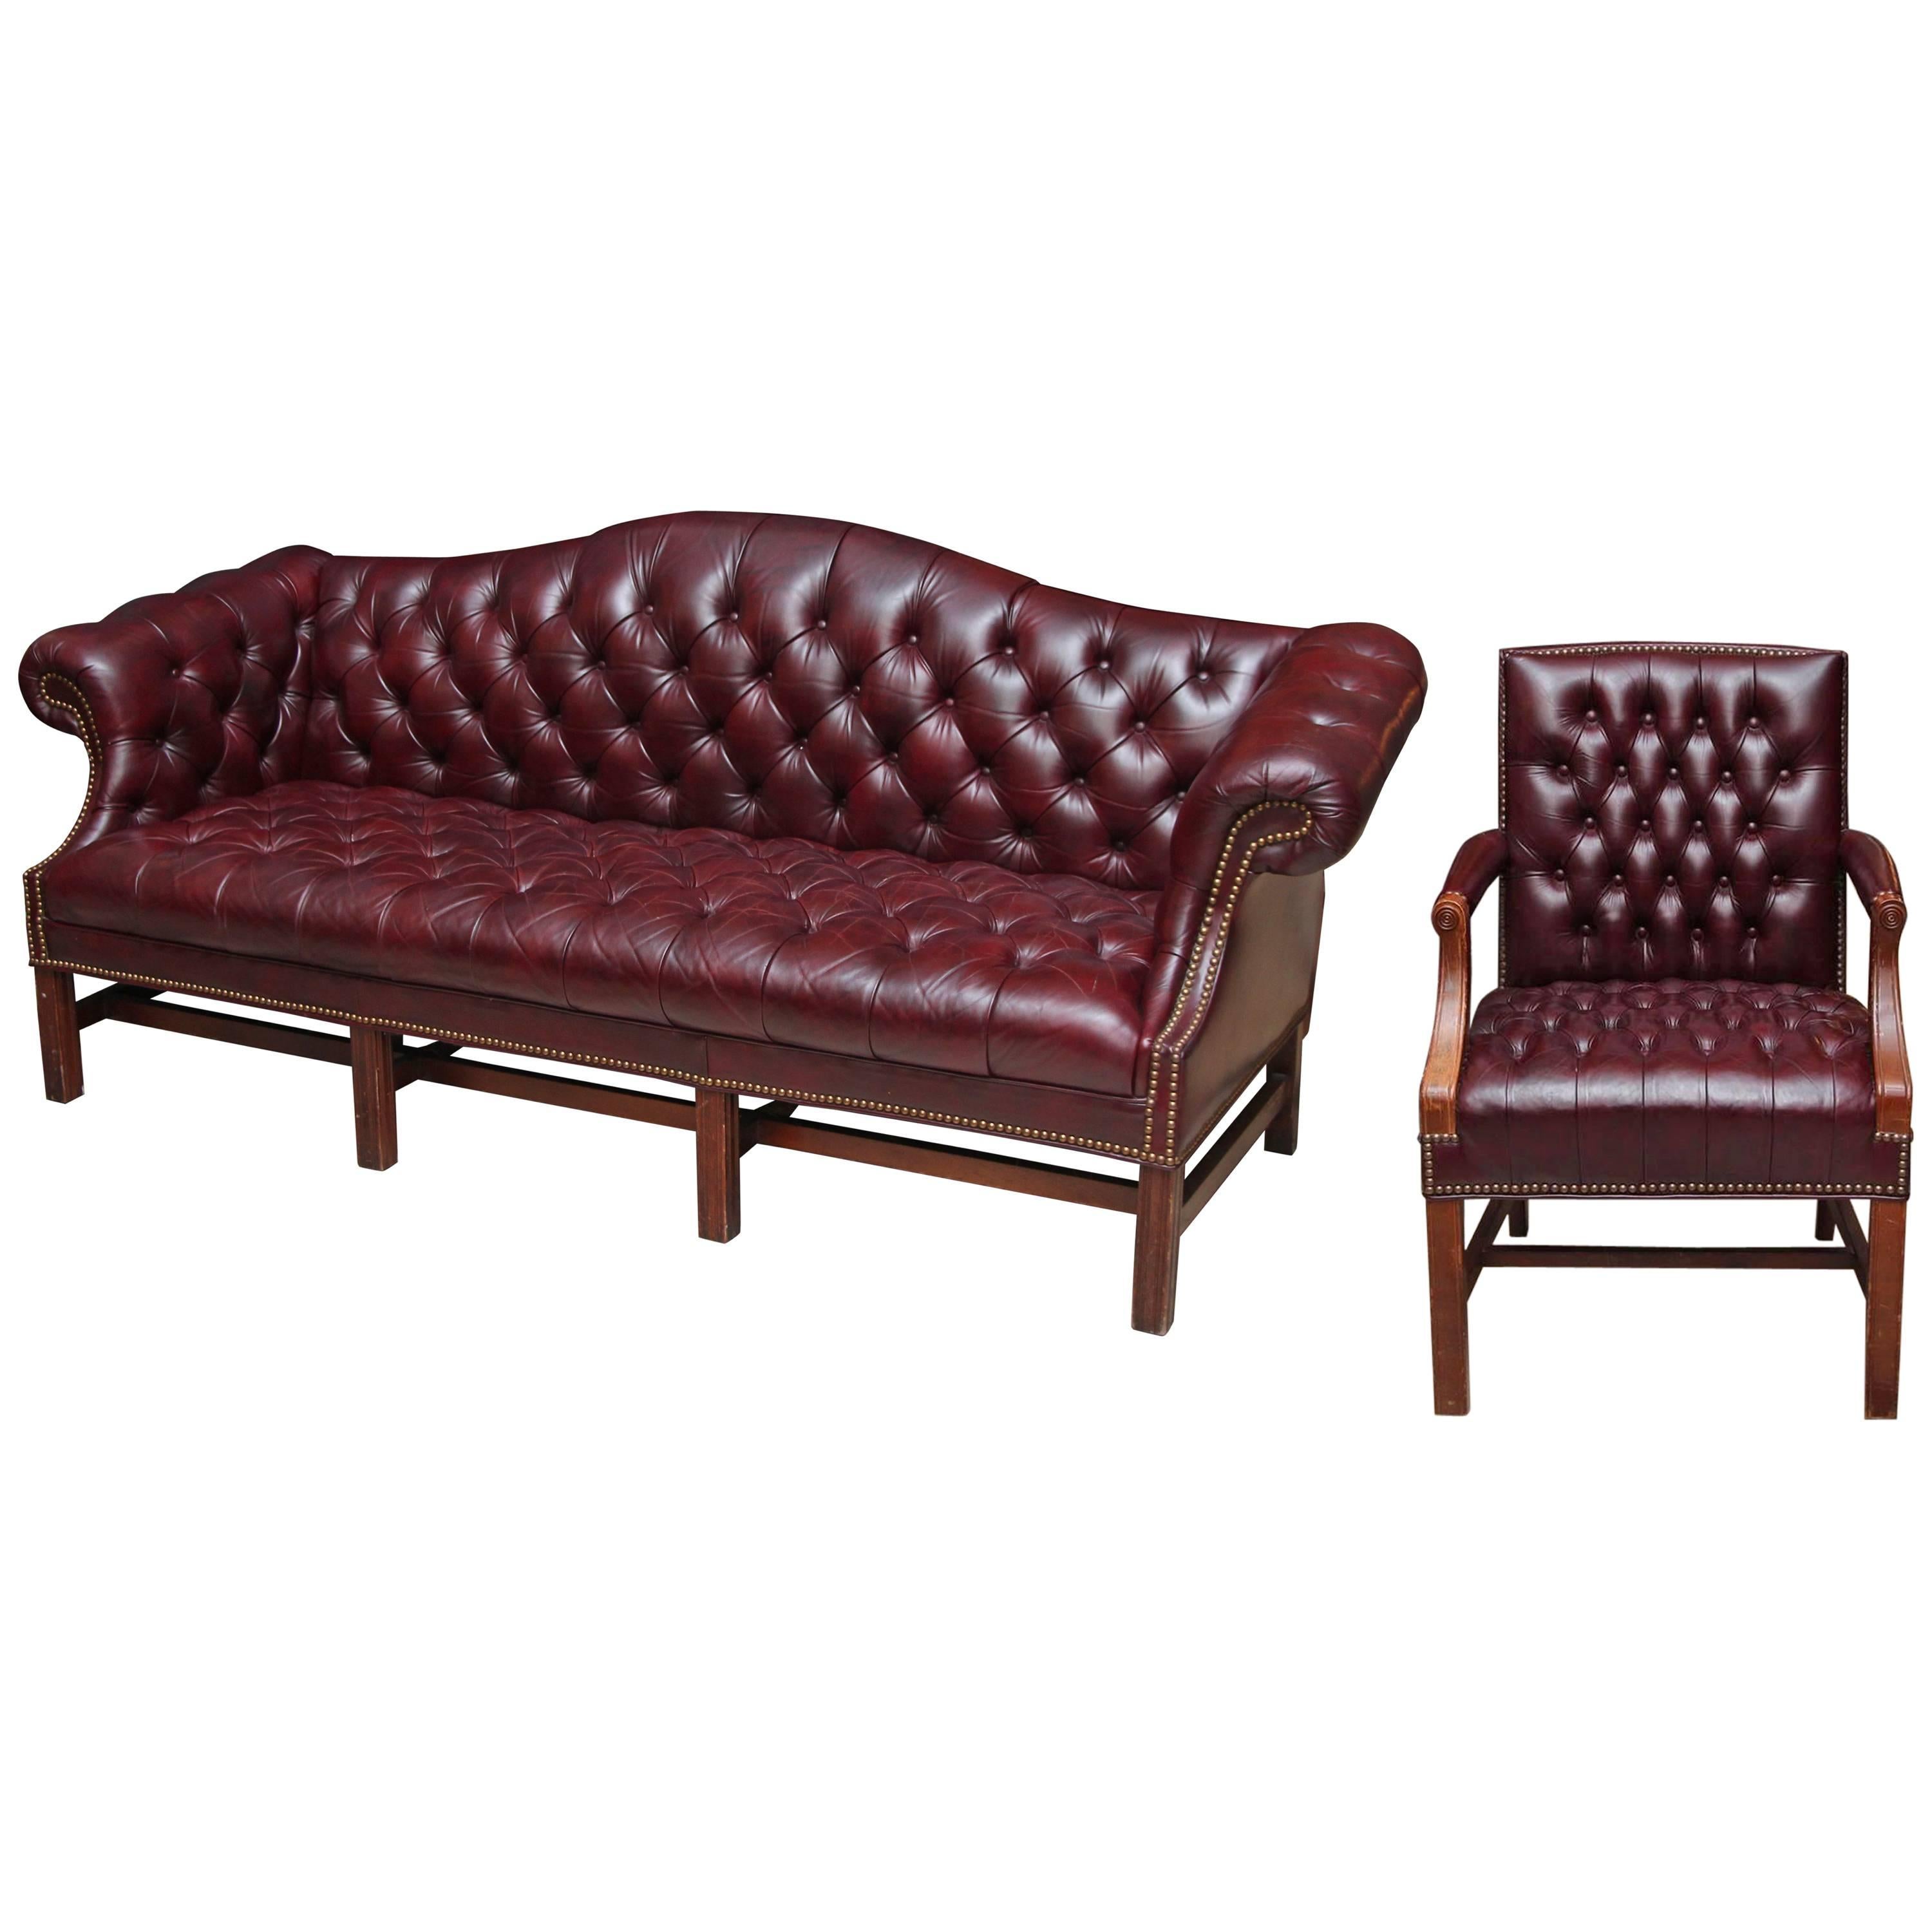 1980s Tufted Burgundy Chesterfield Leather Sofa and Chair Set with Hickory Wood